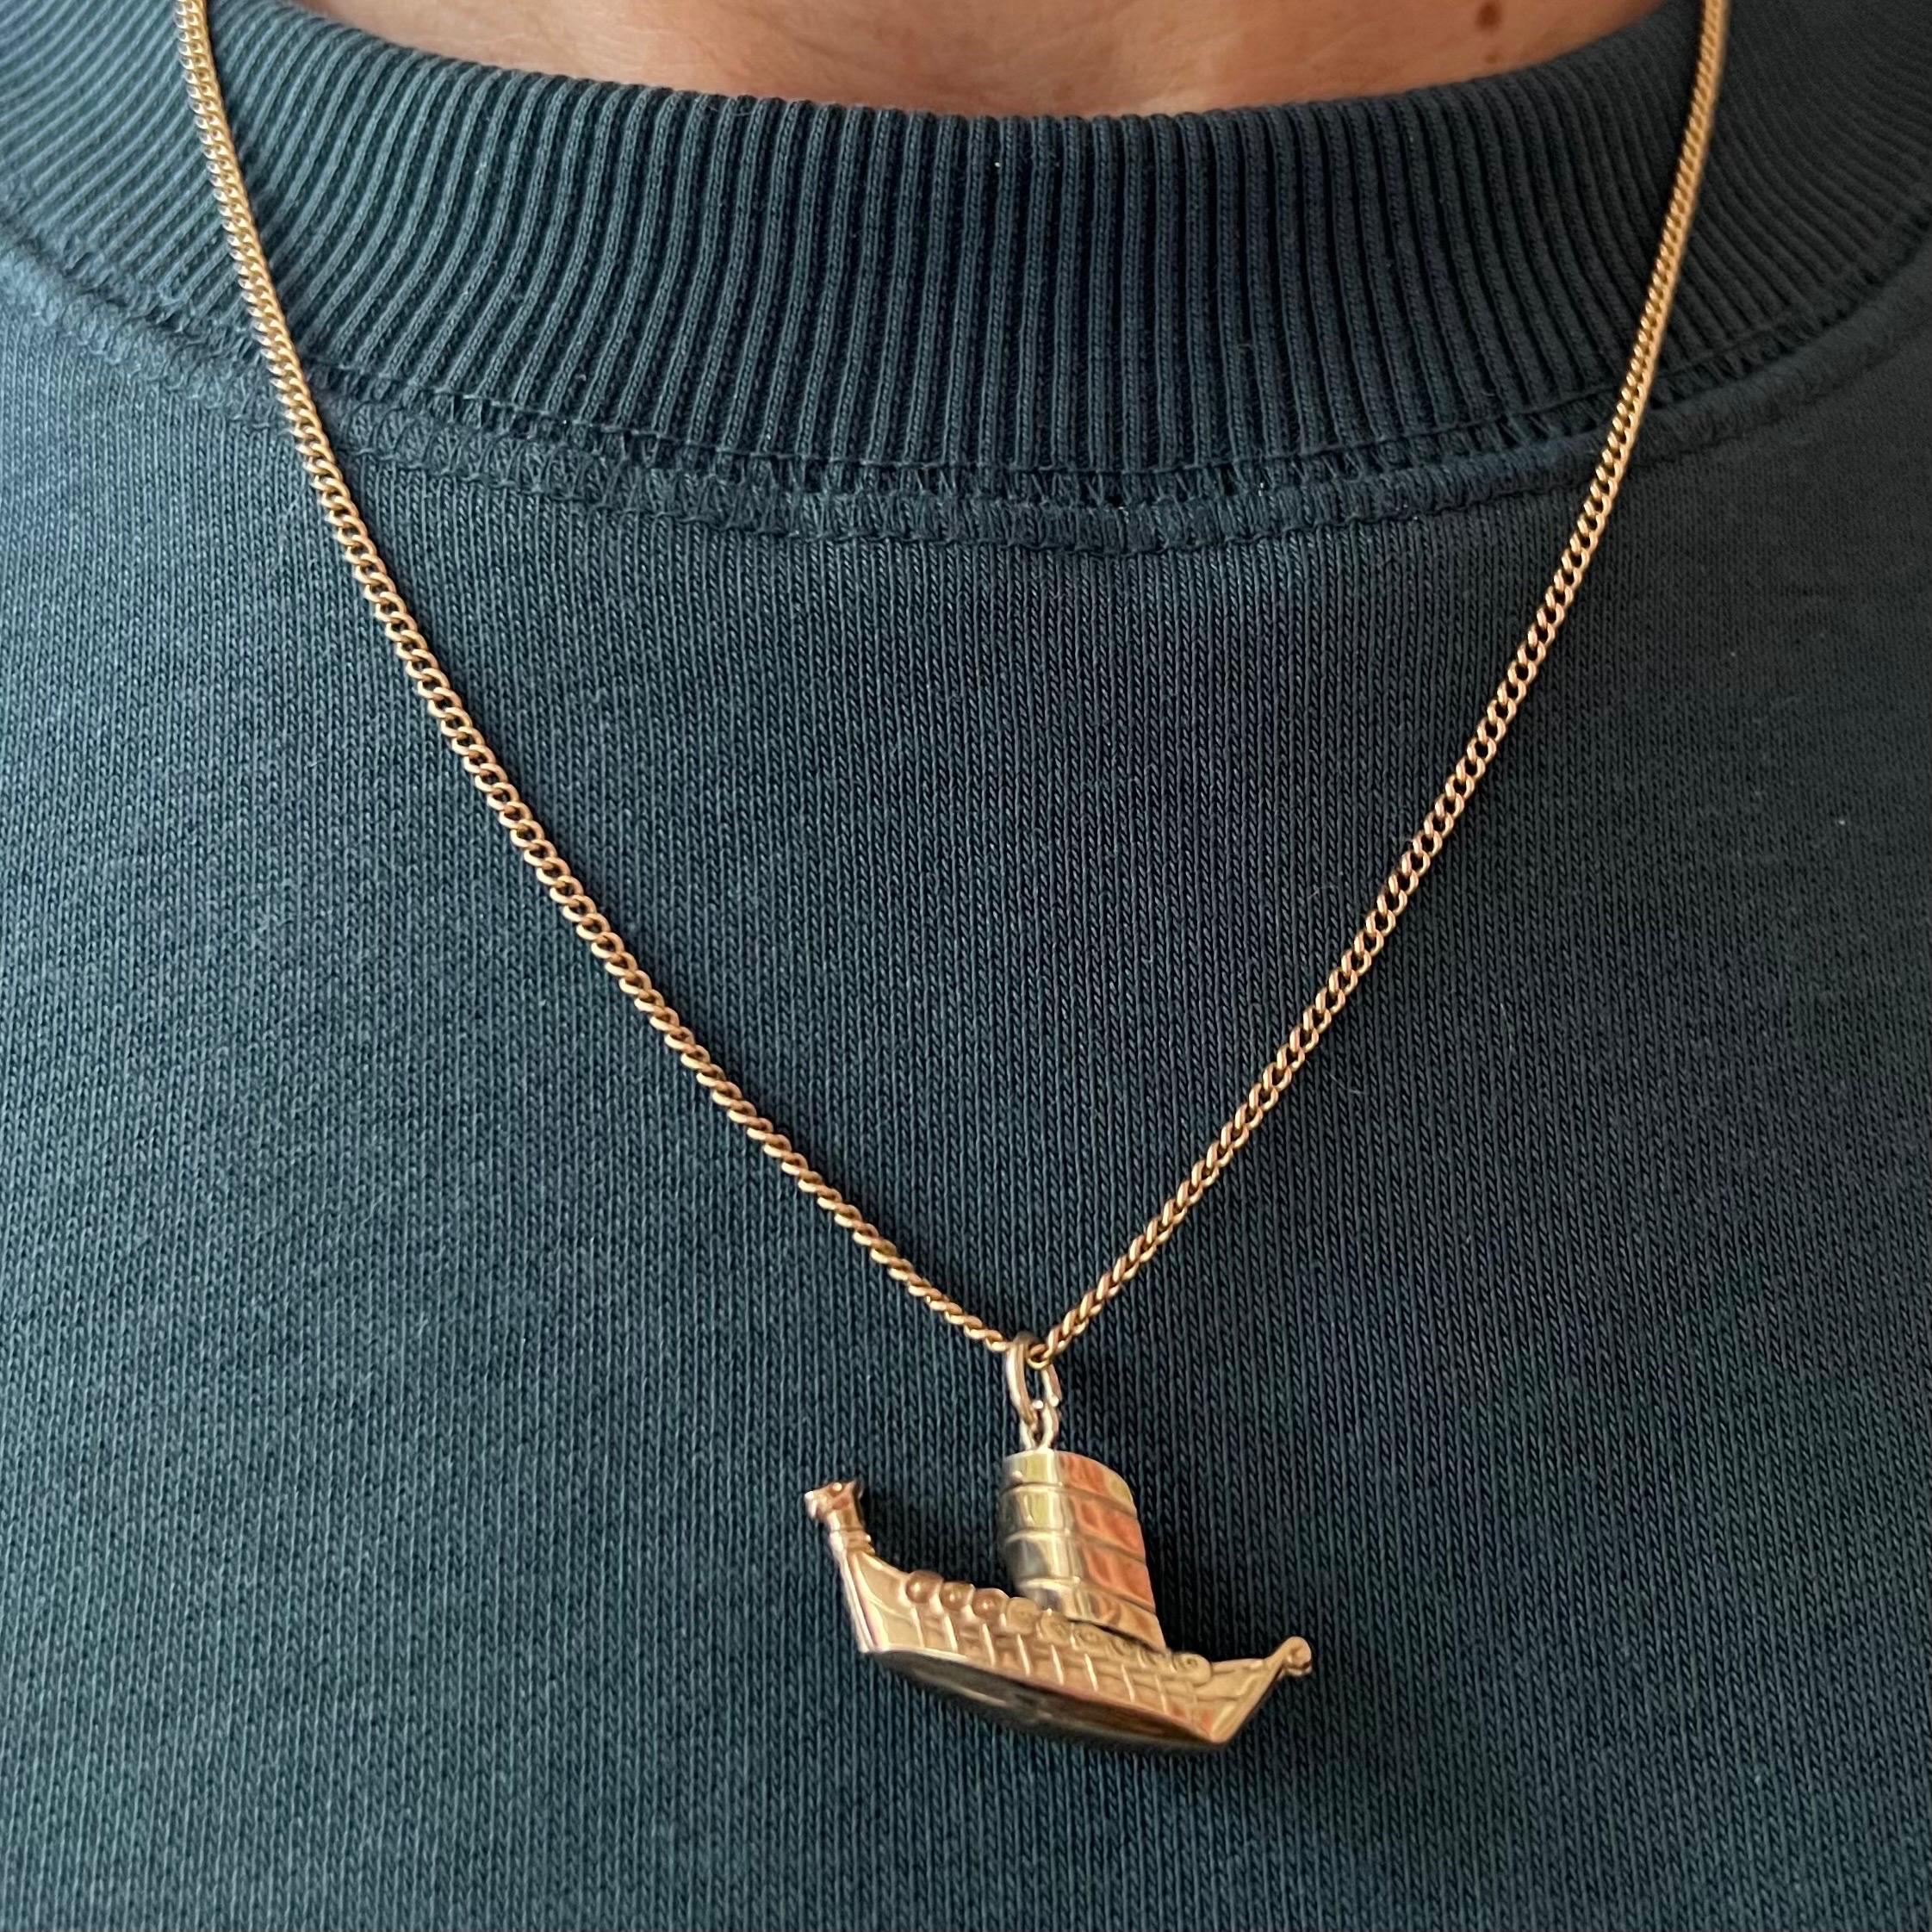 A vintage 9 karat yellow gold raiding viking dragon ship charm pendant. The vessel is beautifully detailed with a large sail, 'wooden' planks, shields on the sides, oars and a fierce dragons head on the stern. 

Viking ships were seagoing vessels